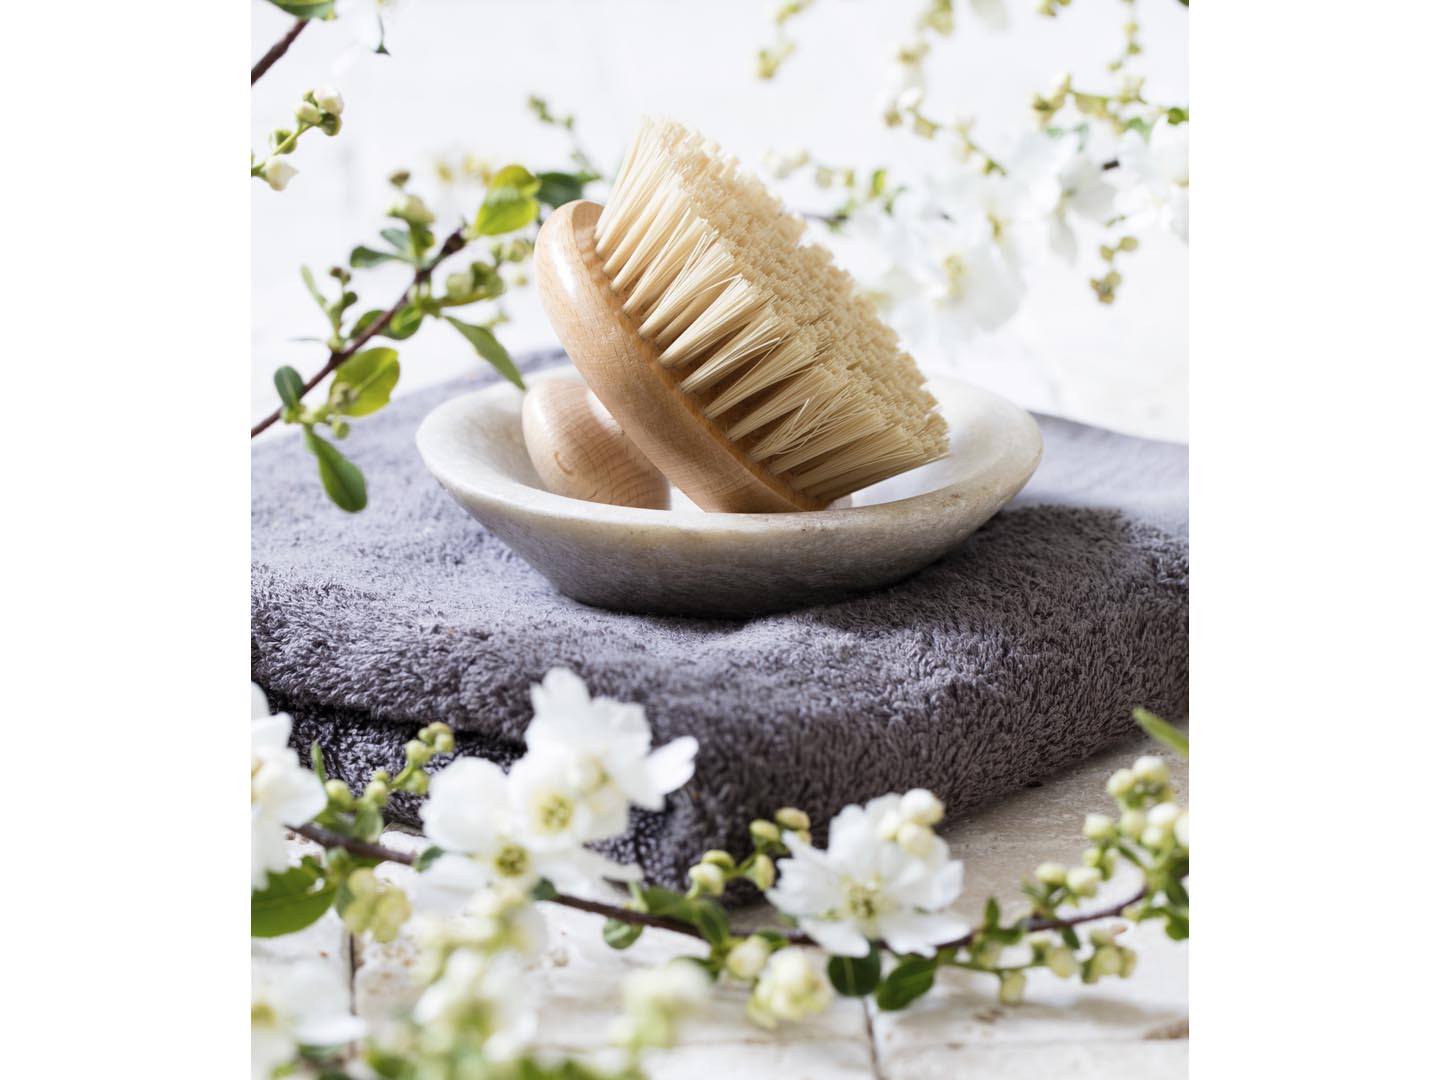 detox still-life - body brush in mineral cup holder over towel and fresh white spring blossom flowers for natural beauty and washing up routine